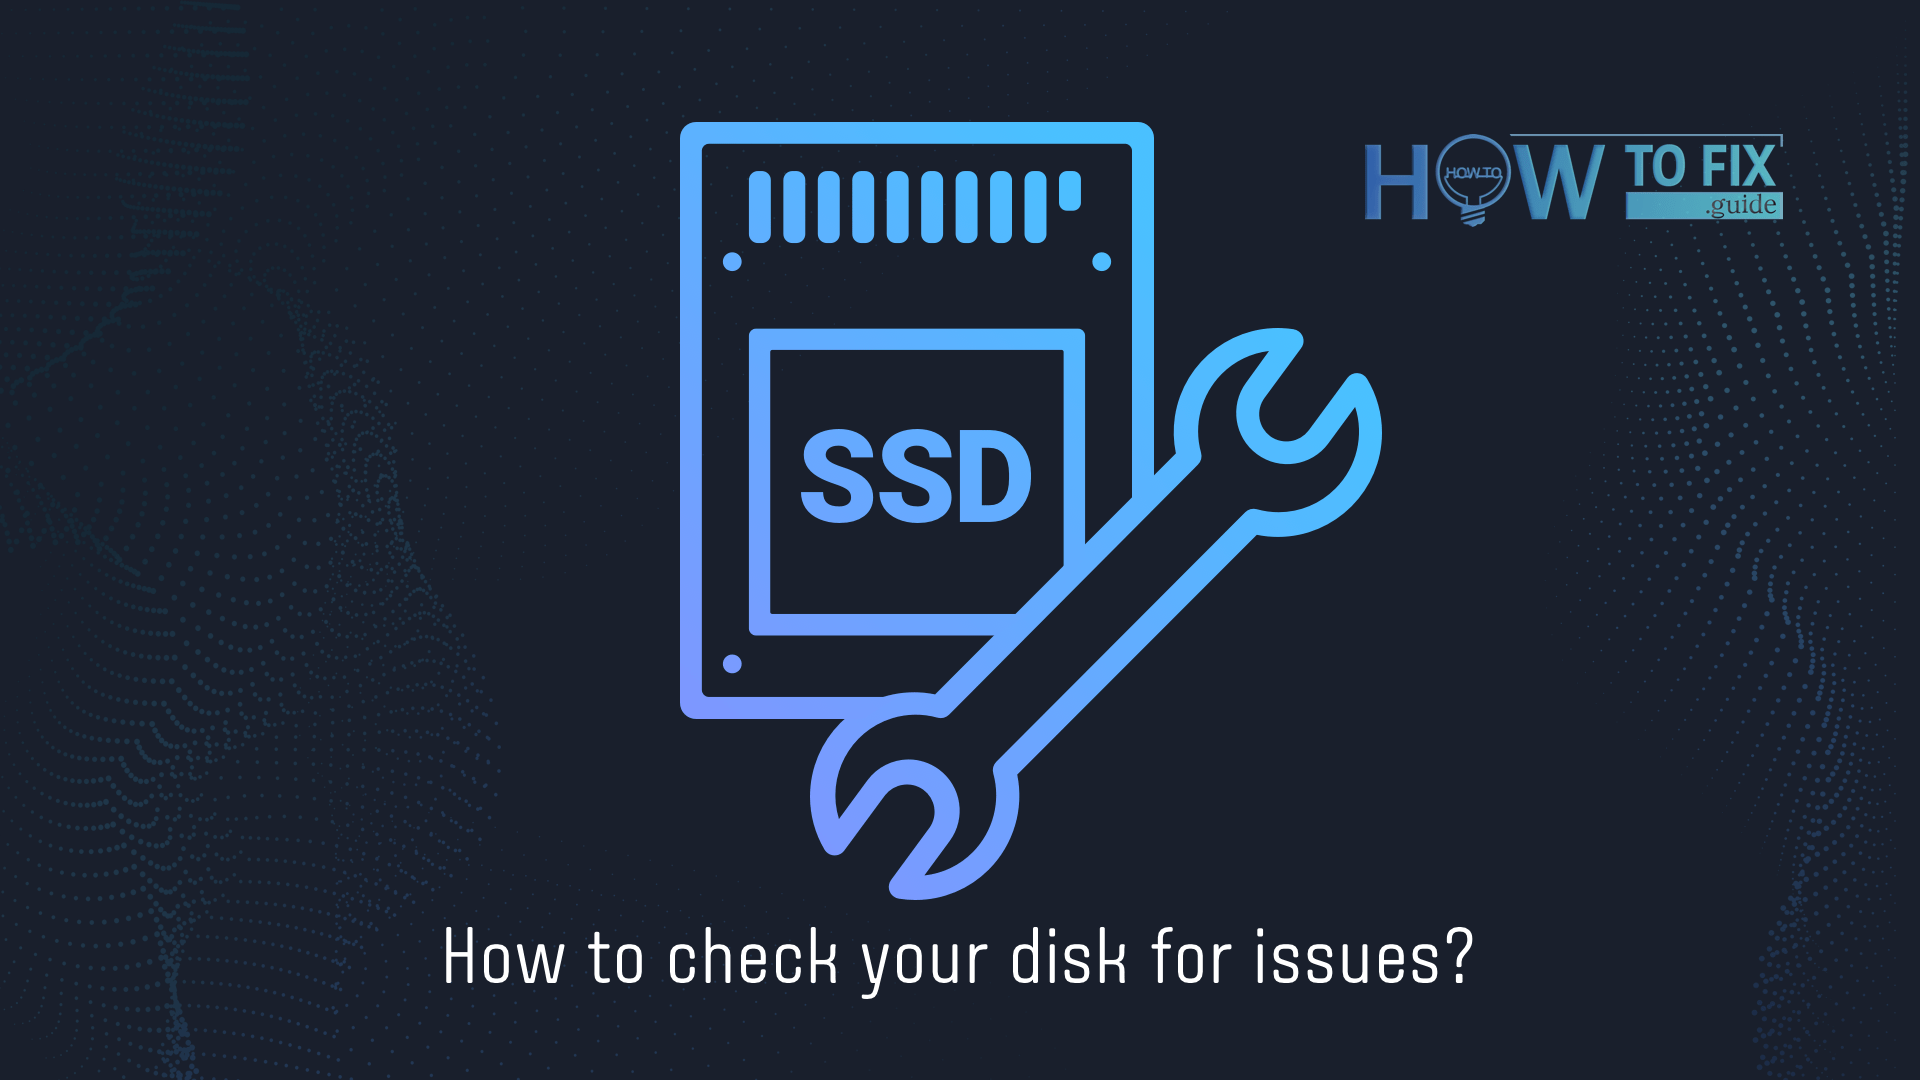 How to check your disk for issues?